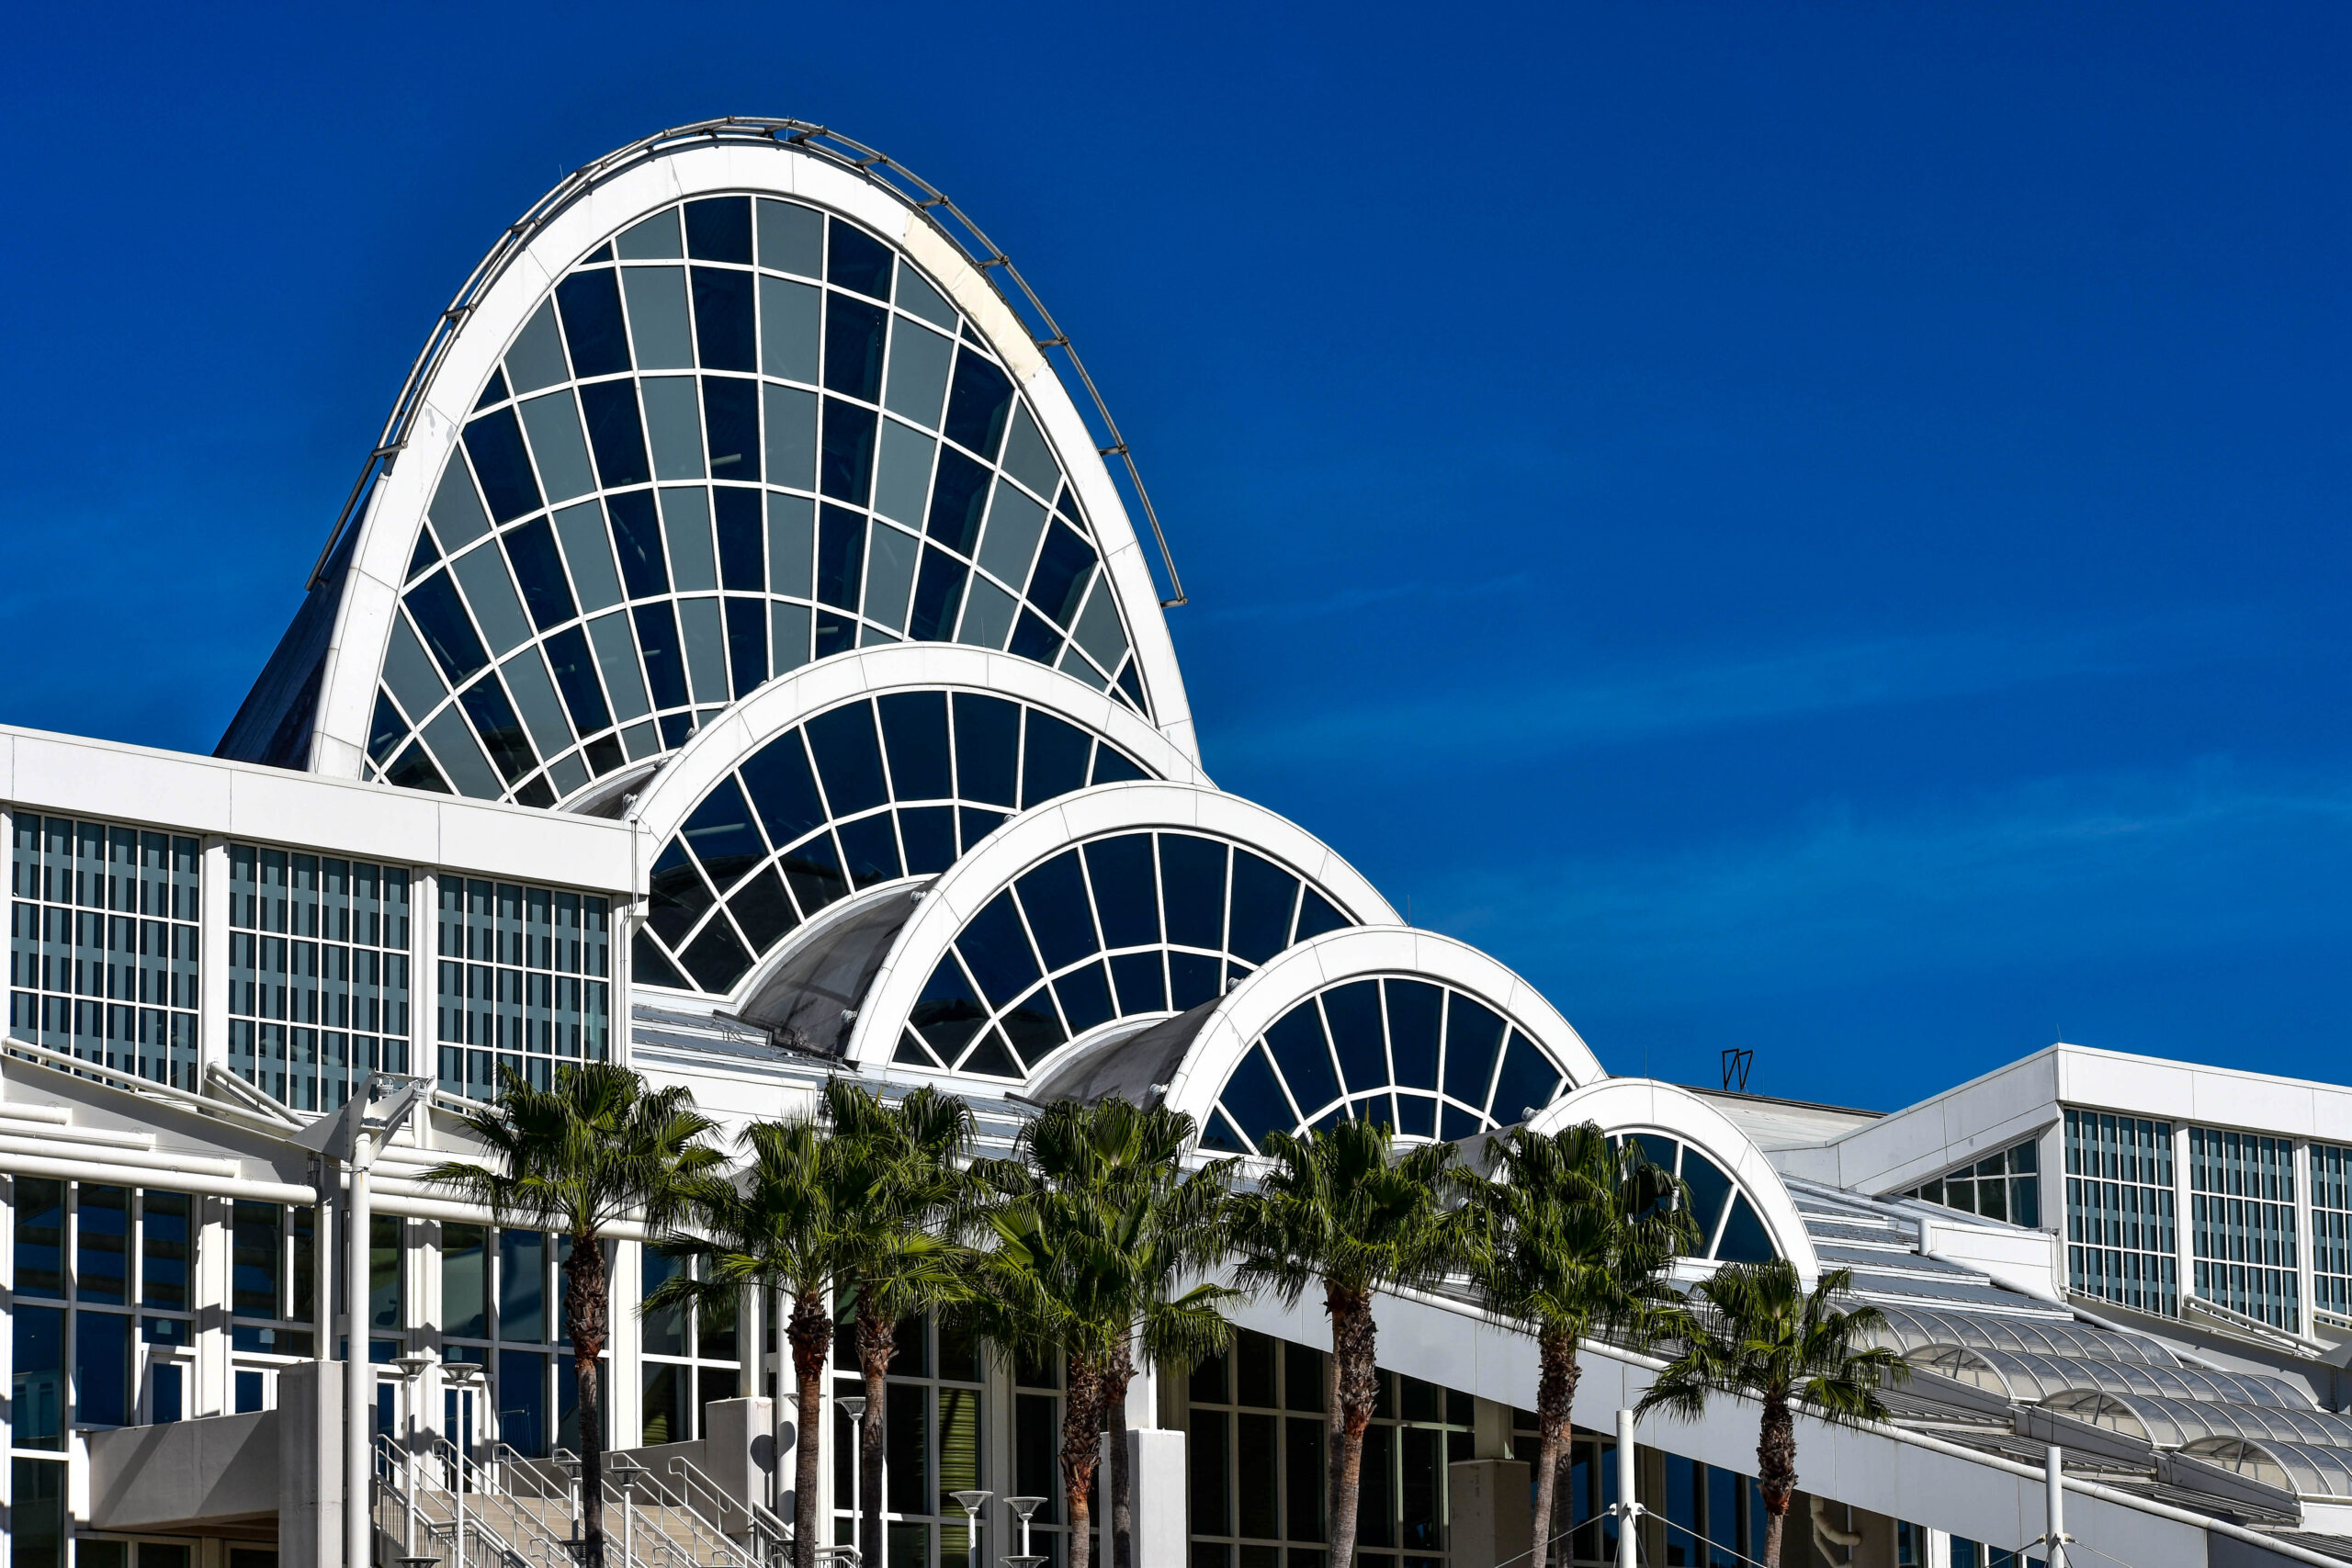 Orlando, Florida. January 12, 2019  Top view of Convention Center on blue sky background at International Drive area (2)